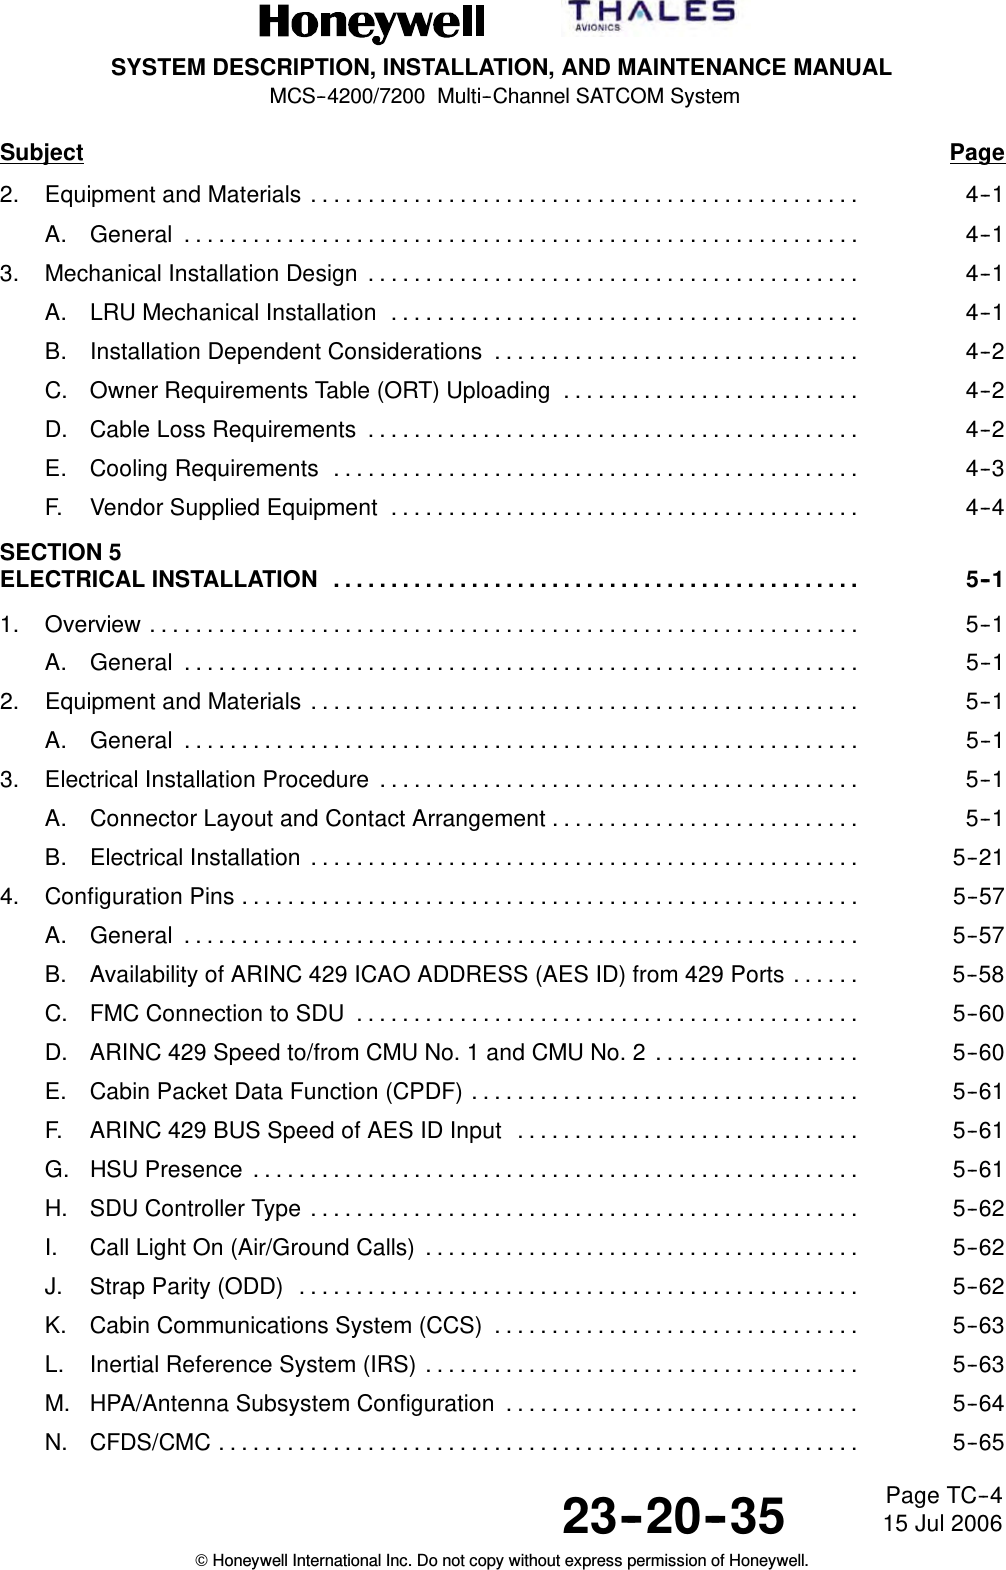 SYSTEM DESCRIPTION, INSTALLATION, AND MAINTENANCE MANUALMCS--4200/7200 Multi--Channel SATCOM System23--20--35 15 Jul 2006Honeywell International Inc. Do not copy without express permission of Honeywell.Page TC--4Subject Page2. Equipment and Materials 4--1................................................A. General 4--1...........................................................3. Mechanical Installation Design 4--1...........................................A. LRU Mechanical Installation 4--1.........................................B. Installation Dependent Considerations 4--2................................C. Owner Requirements Table (ORT) Uploading 4--2..........................D. Cable Loss Requirements 4--2...........................................E. Cooling Requirements 4--3..............................................F. Vendor Supplied Equipment 4--4.........................................SECTION 5ELECTRICAL INSTALLATION 5--1..............................................1. Overview 5--1..............................................................A. General 5--1...........................................................2. Equipment and Materials 5--1................................................A. General 5--1...........................................................3. Electrical Installation Procedure 5--1..........................................A. Connector Layout and Contact Arrangement 5--1...........................B. Electrical Installation 5--21................................................4. Configuration Pins 5--57......................................................A. General 5--57...........................................................B. Availability of ARINC 429 ICAO ADDRESS (AES ID) from 429 Ports 5--58......C. FMC Connection to SDU 5--60............................................D. ARINC 429 Speed to/from CMU No. 1 and CMU No. 2 5--60..................E. Cabin Packet Data Function (CPDF) 5--61..................................F. ARINC 429 BUS Speed of AES ID Input 5--61..............................G. HSU Presence 5--61.....................................................H. SDU Controller Type 5--62................................................I. Call Light On (Air/Ground Calls) 5--62......................................J. Strap Parity (ODD) 5--62.................................................K. Cabin Communications System (CCS) 5--63................................L. Inertial Reference System (IRS) 5--63......................................M. HPA/Antenna Subsystem Configuration 5--64...............................N. CFDS/CMC 5--65........................................................